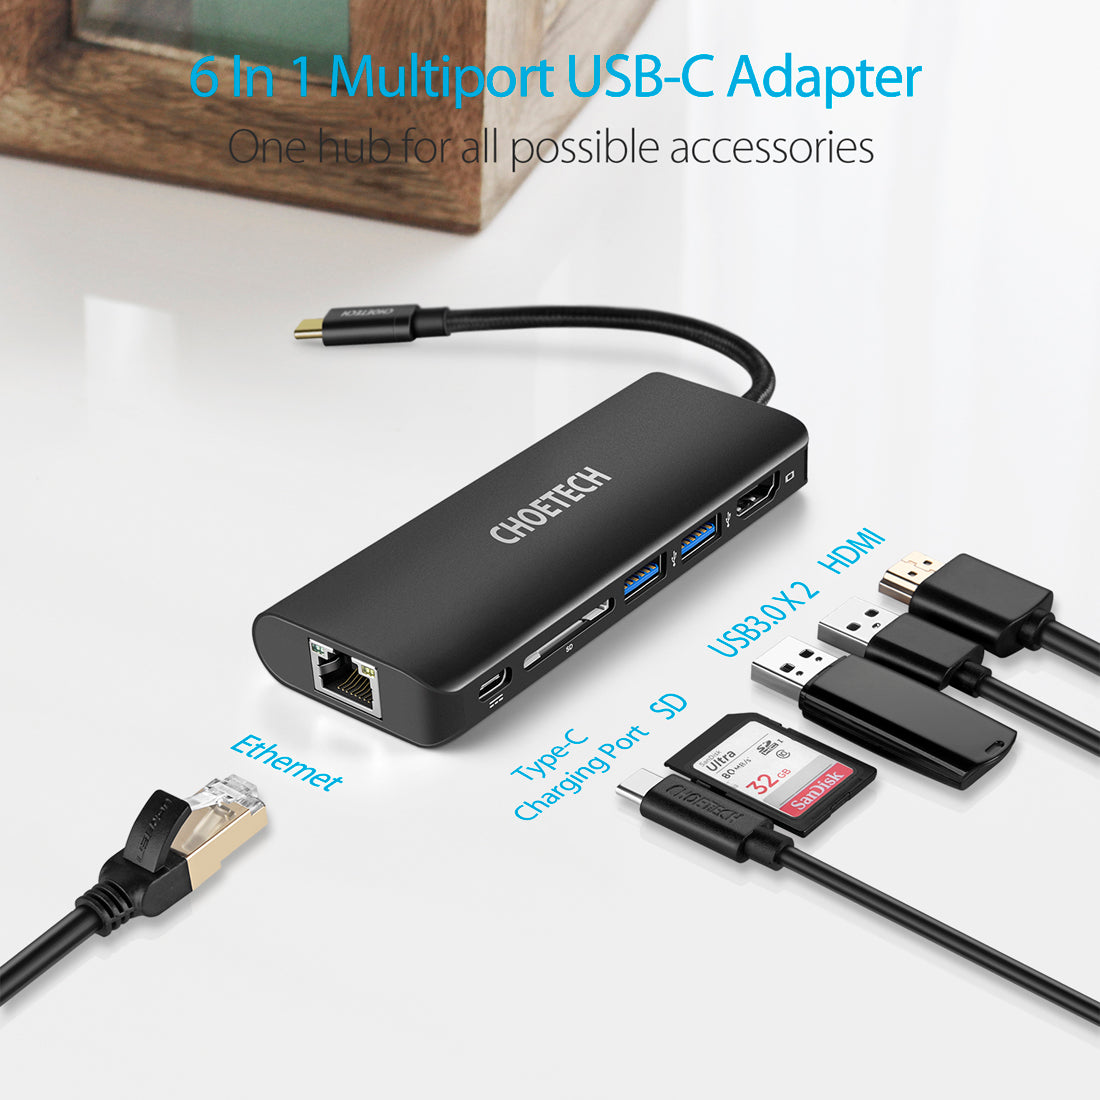 CHOETECH USB C Hub Multiport Adapter, 6 in 1 Type C Hub Adapter CHOETECH OFFICIAL